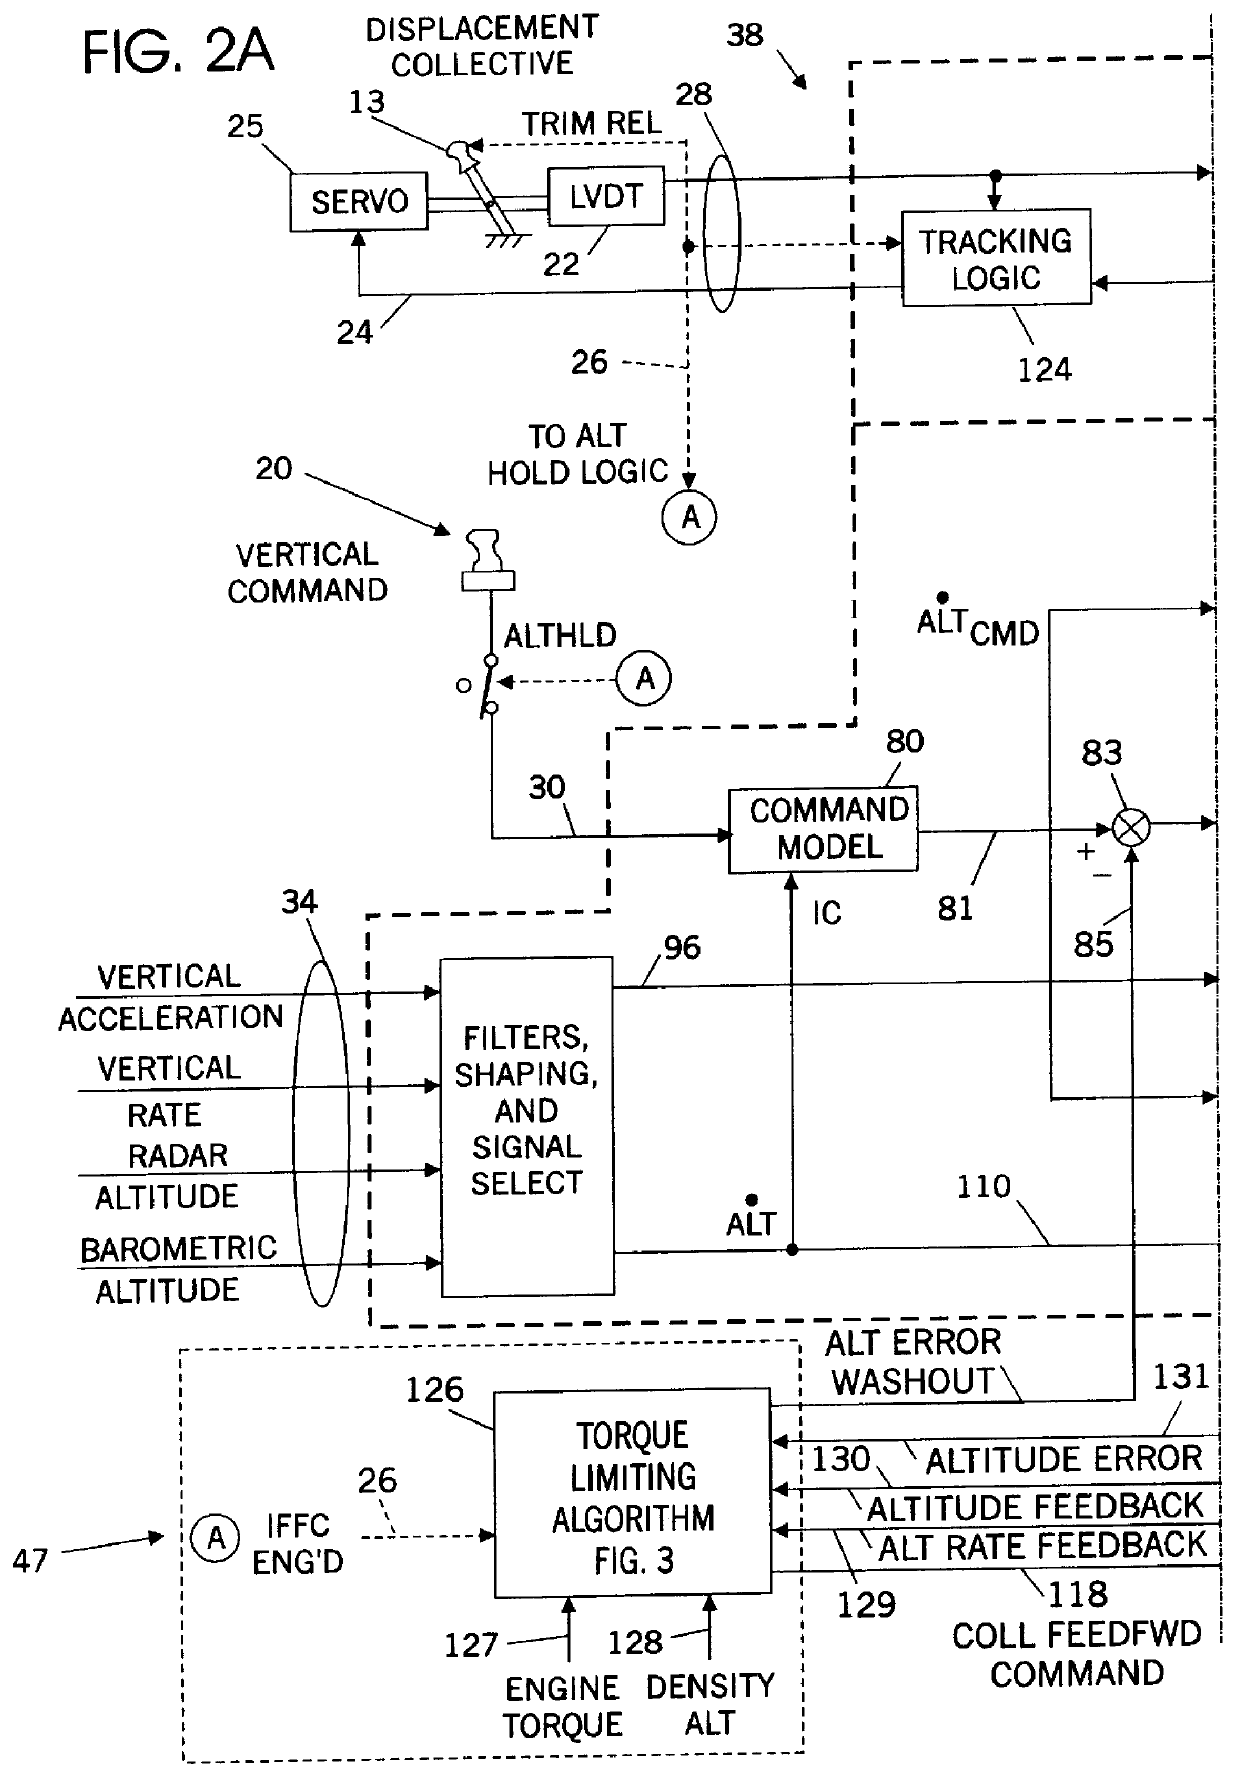 Integrated fire and flight control system with automatic engine torque limiting